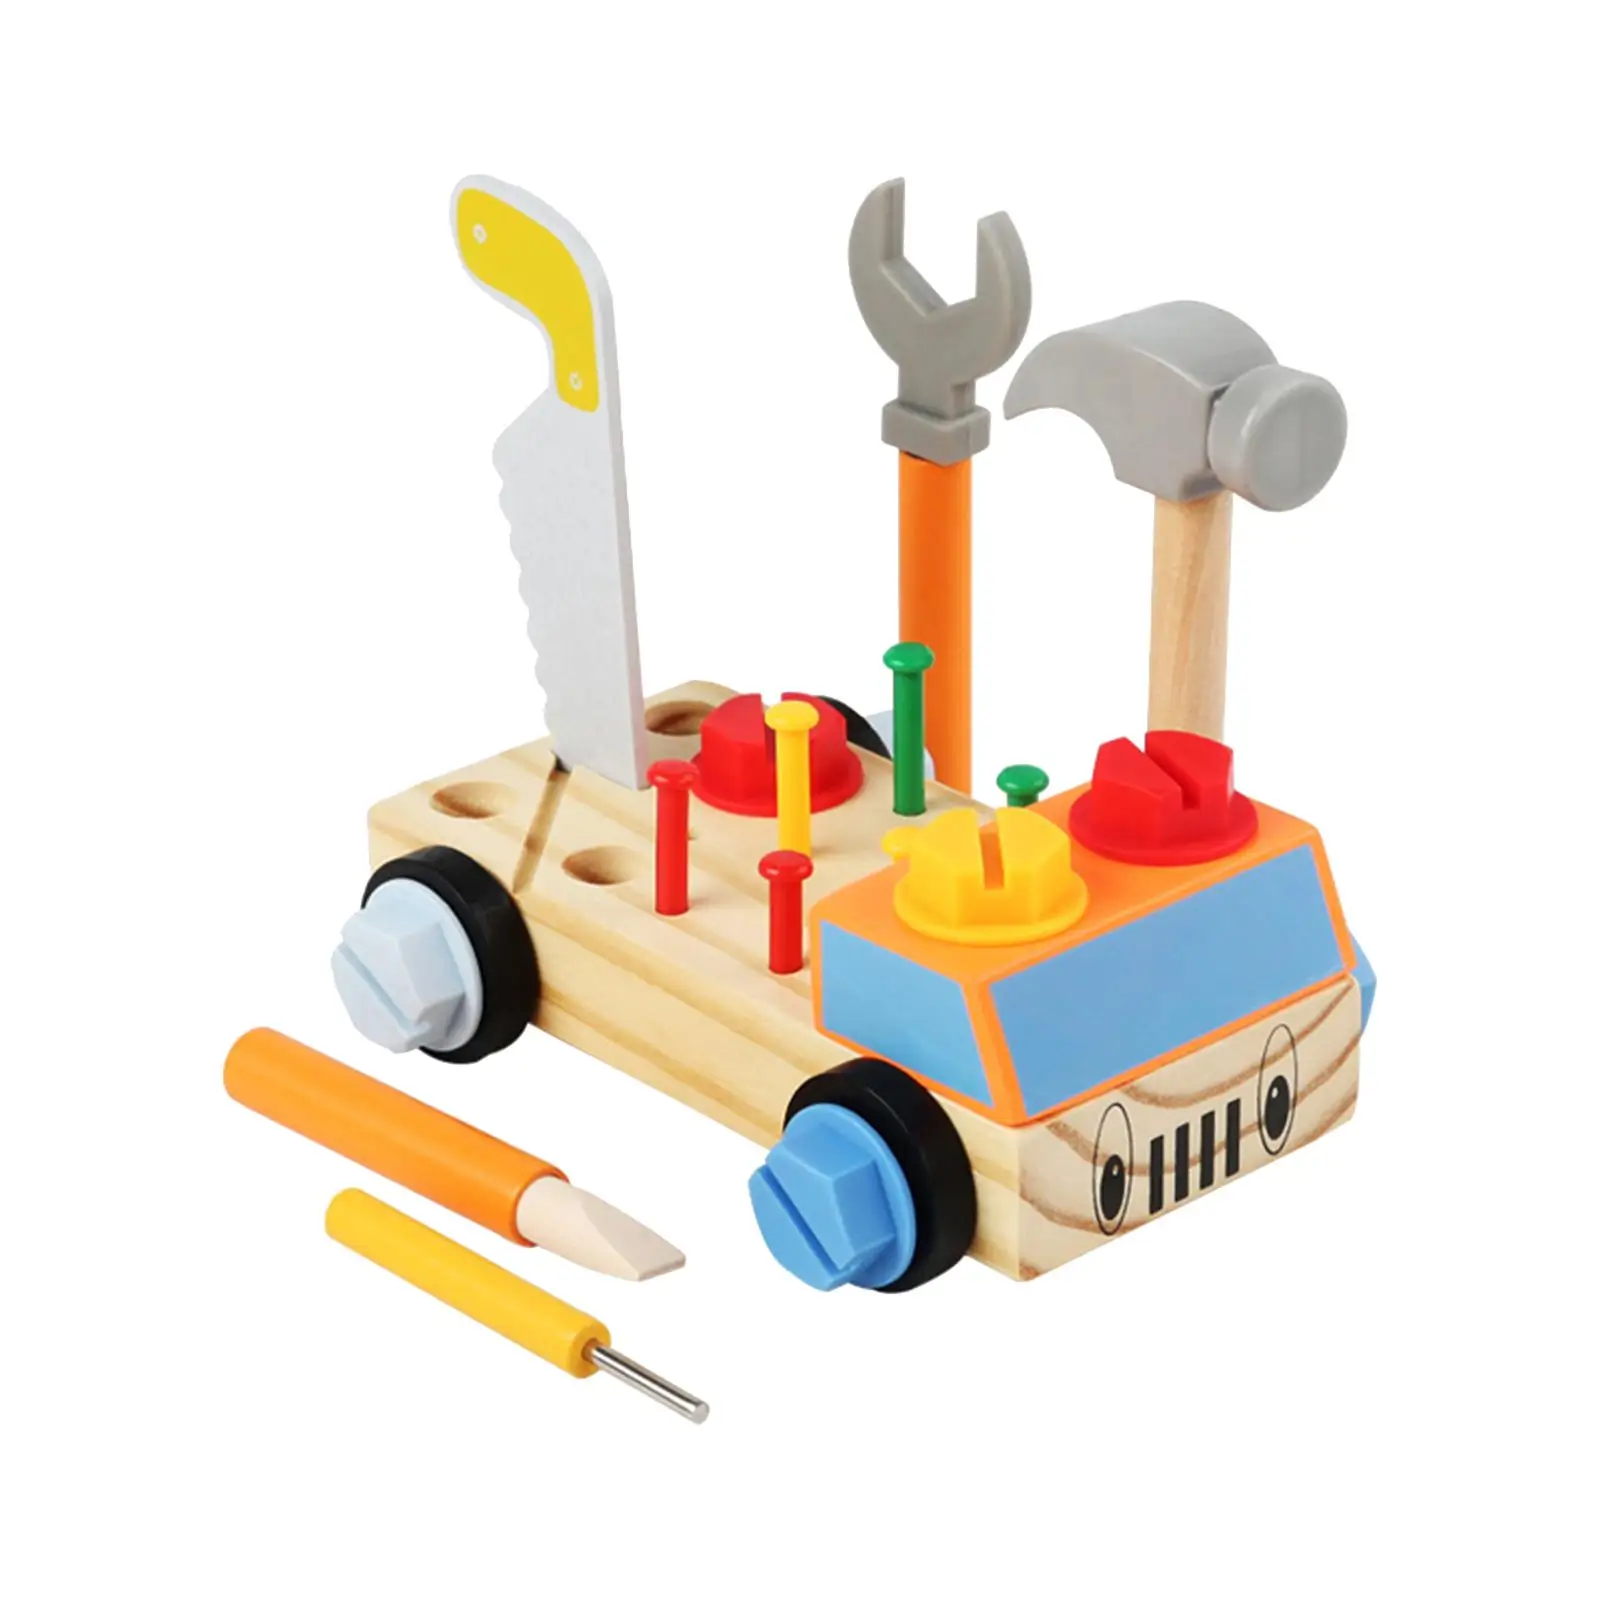 Wooden Play Tool Set Disassembly Toy Woodworking Repair Tools Children`s